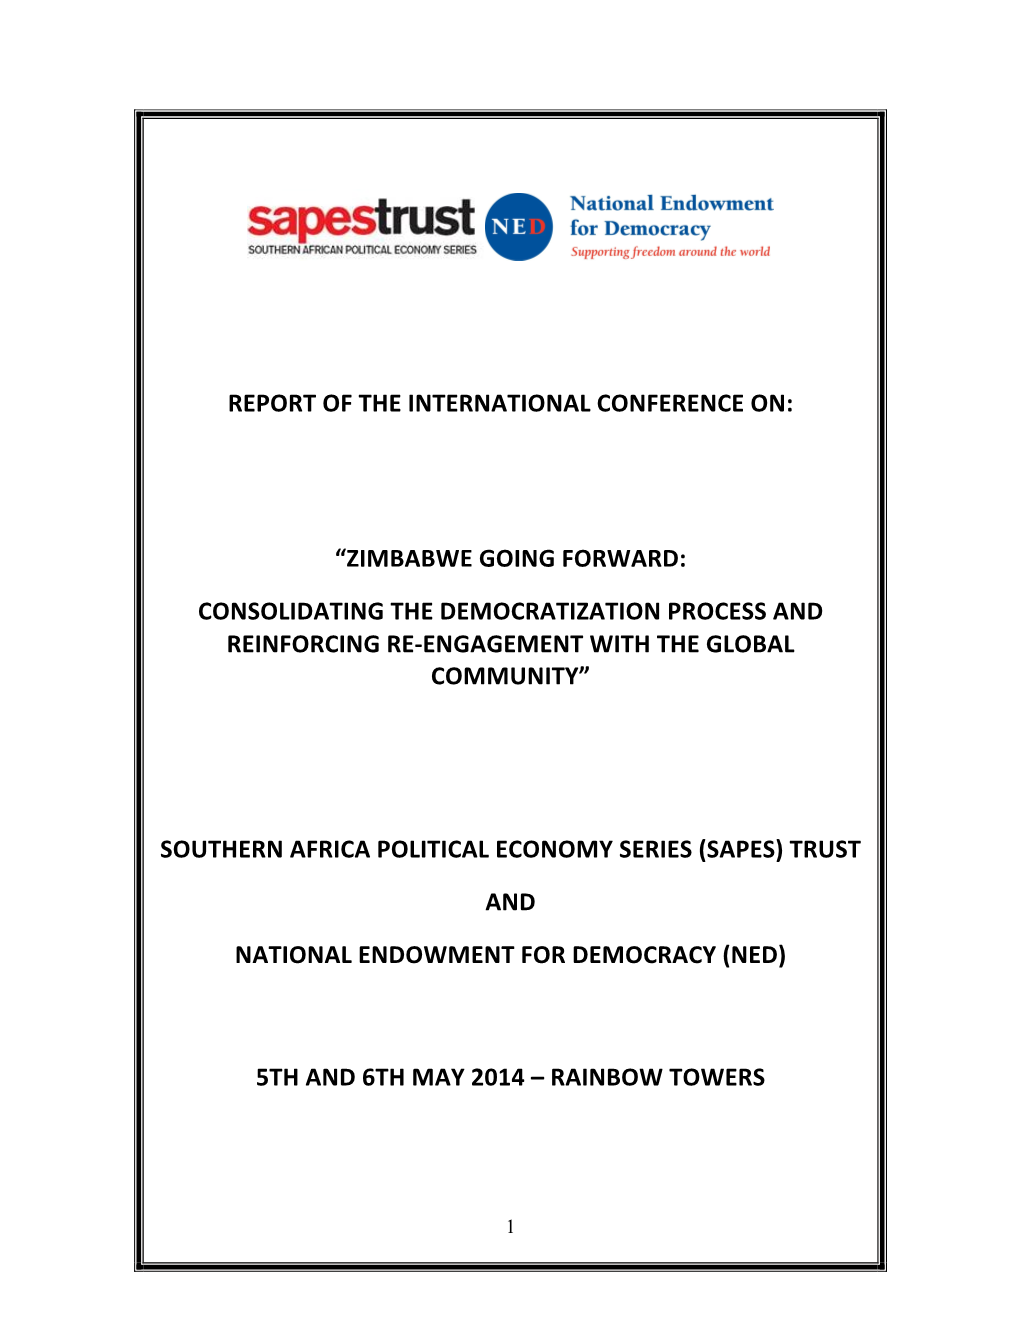 Sapes Trust and Ned Conference Report